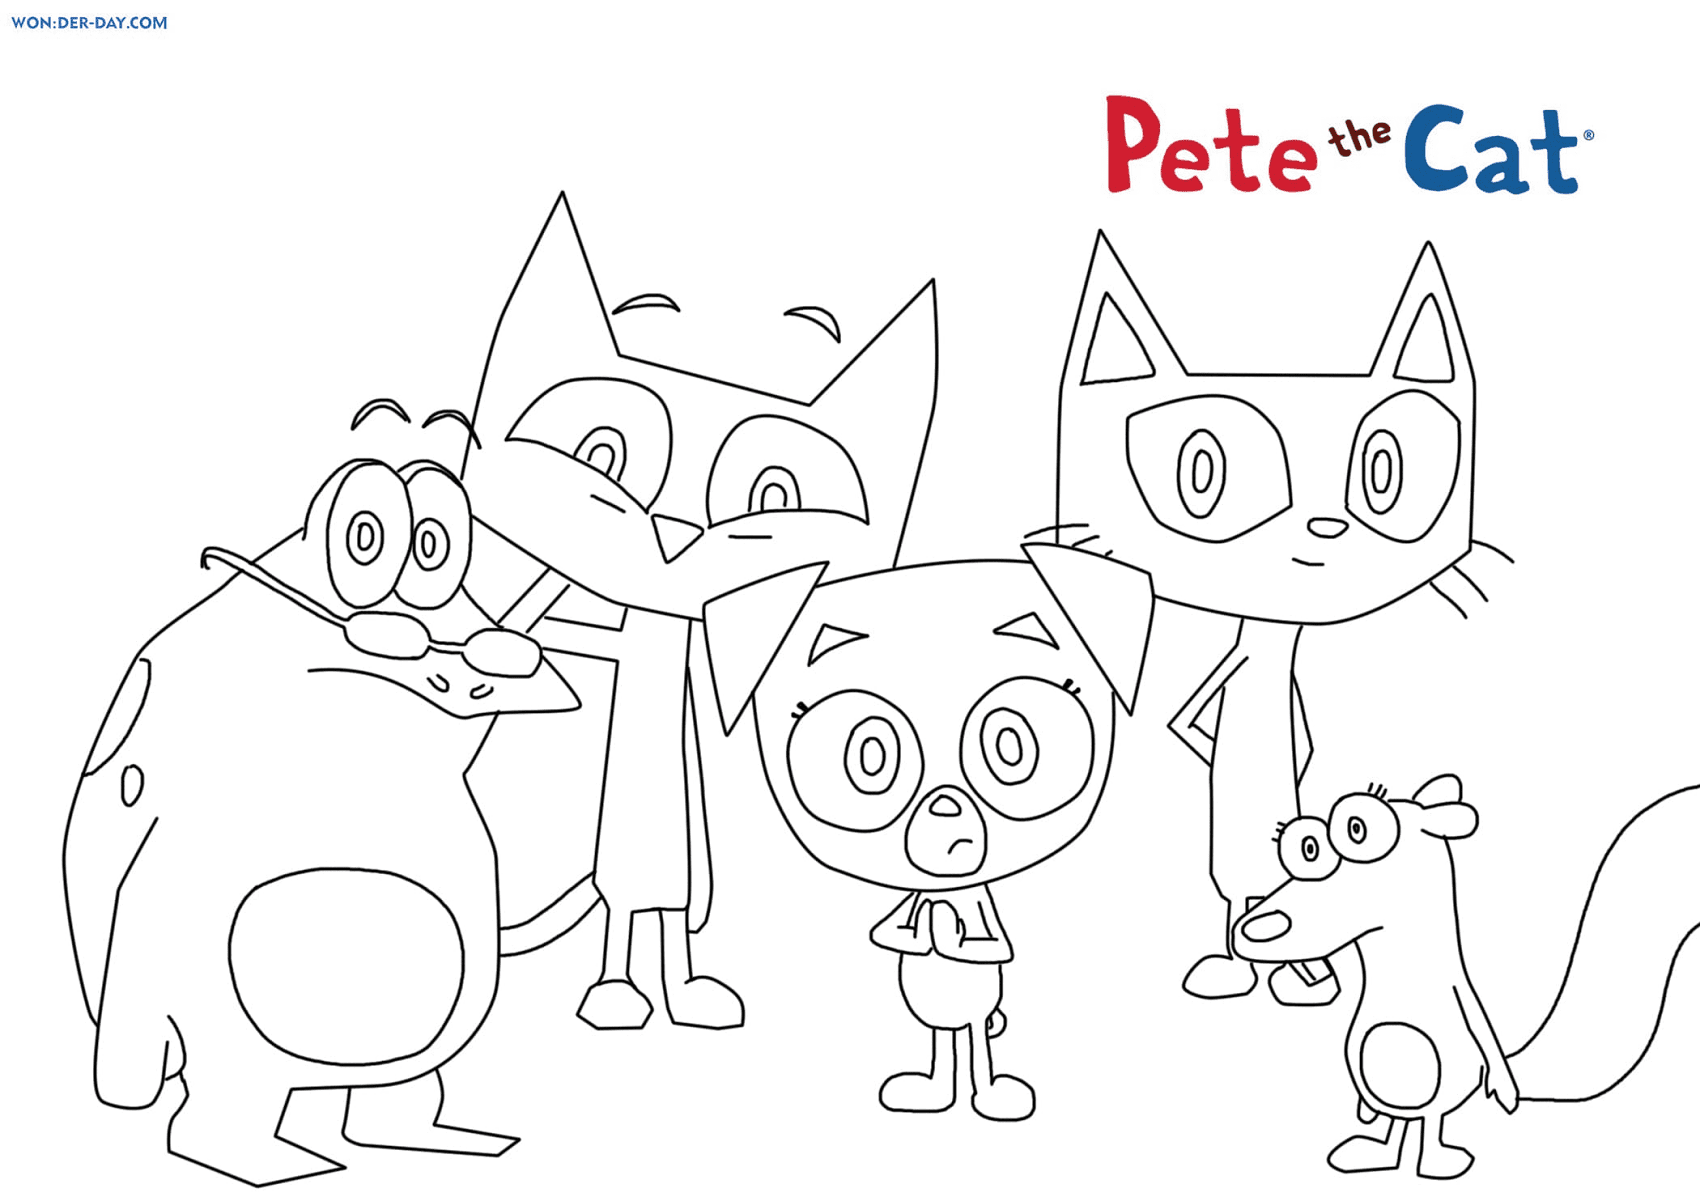 Pete the Cat and his Friends Coloring Page